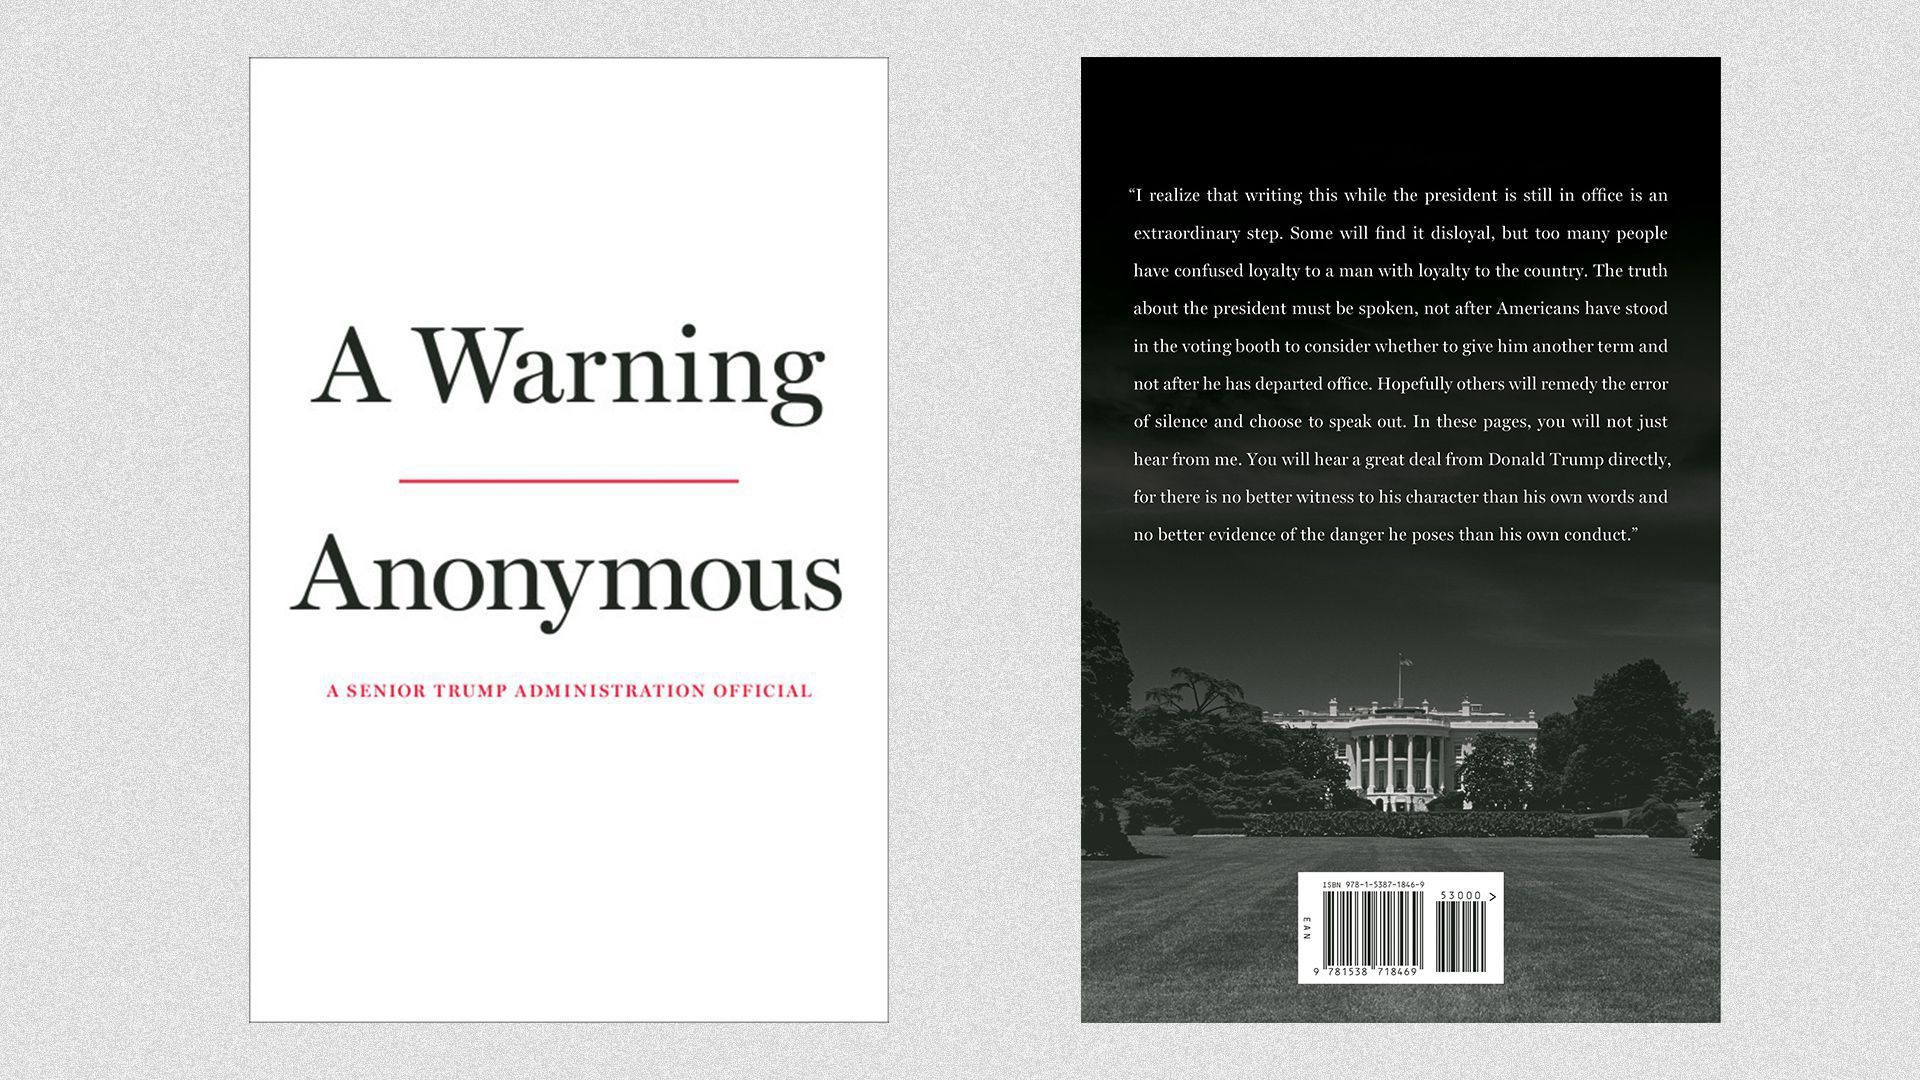 Book cover for "A Warning"